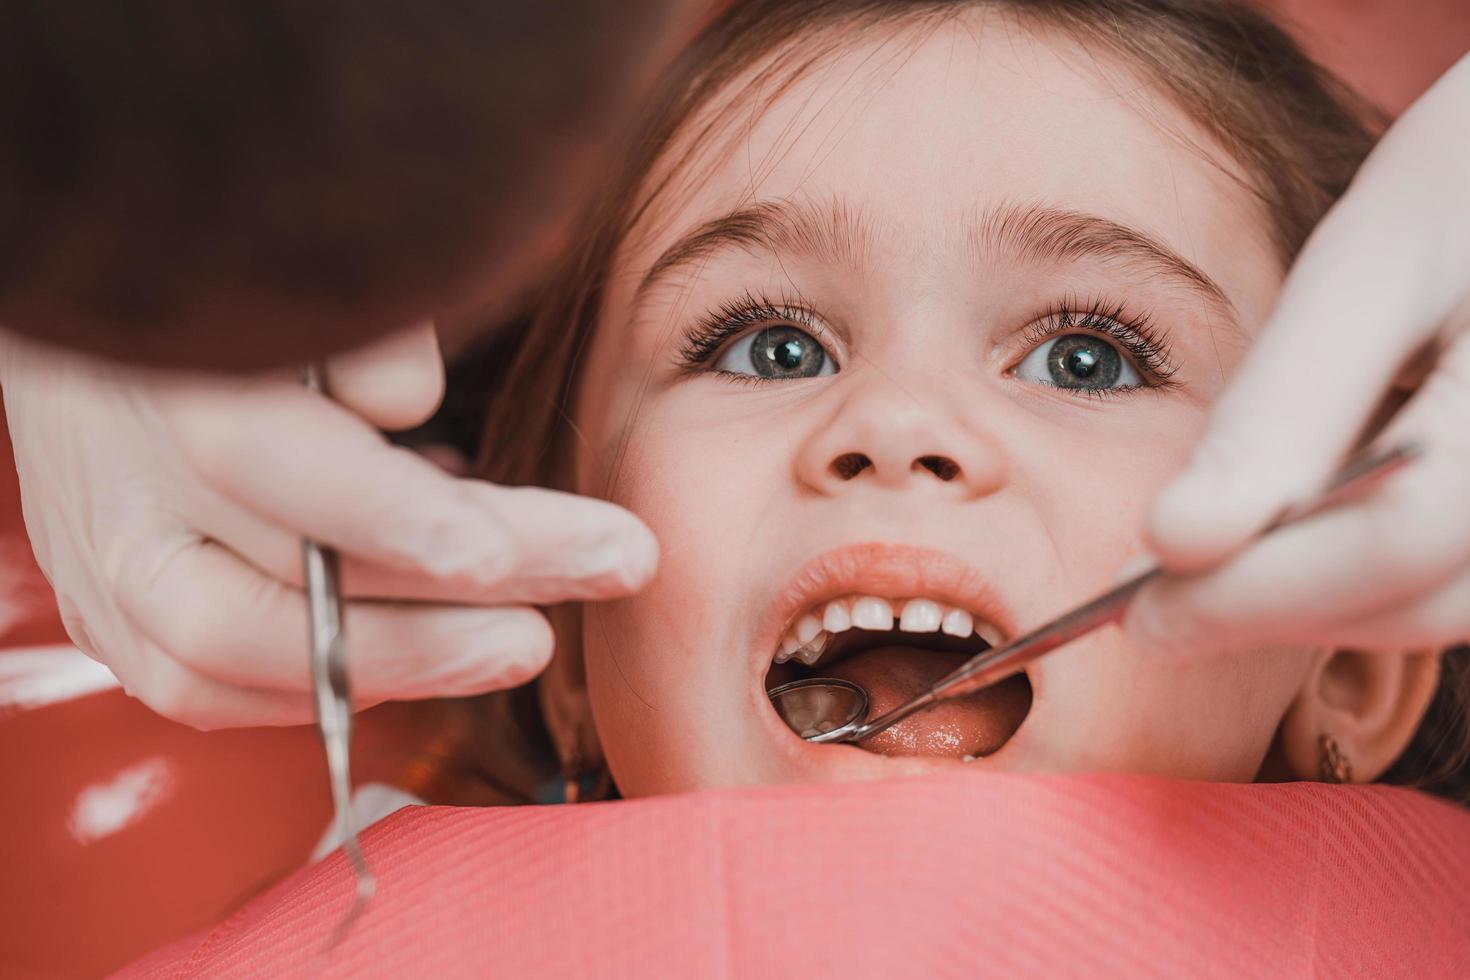 Treatment of baby teeth in a child, a little girl at the dentist, examination and treatment of teeth. photo